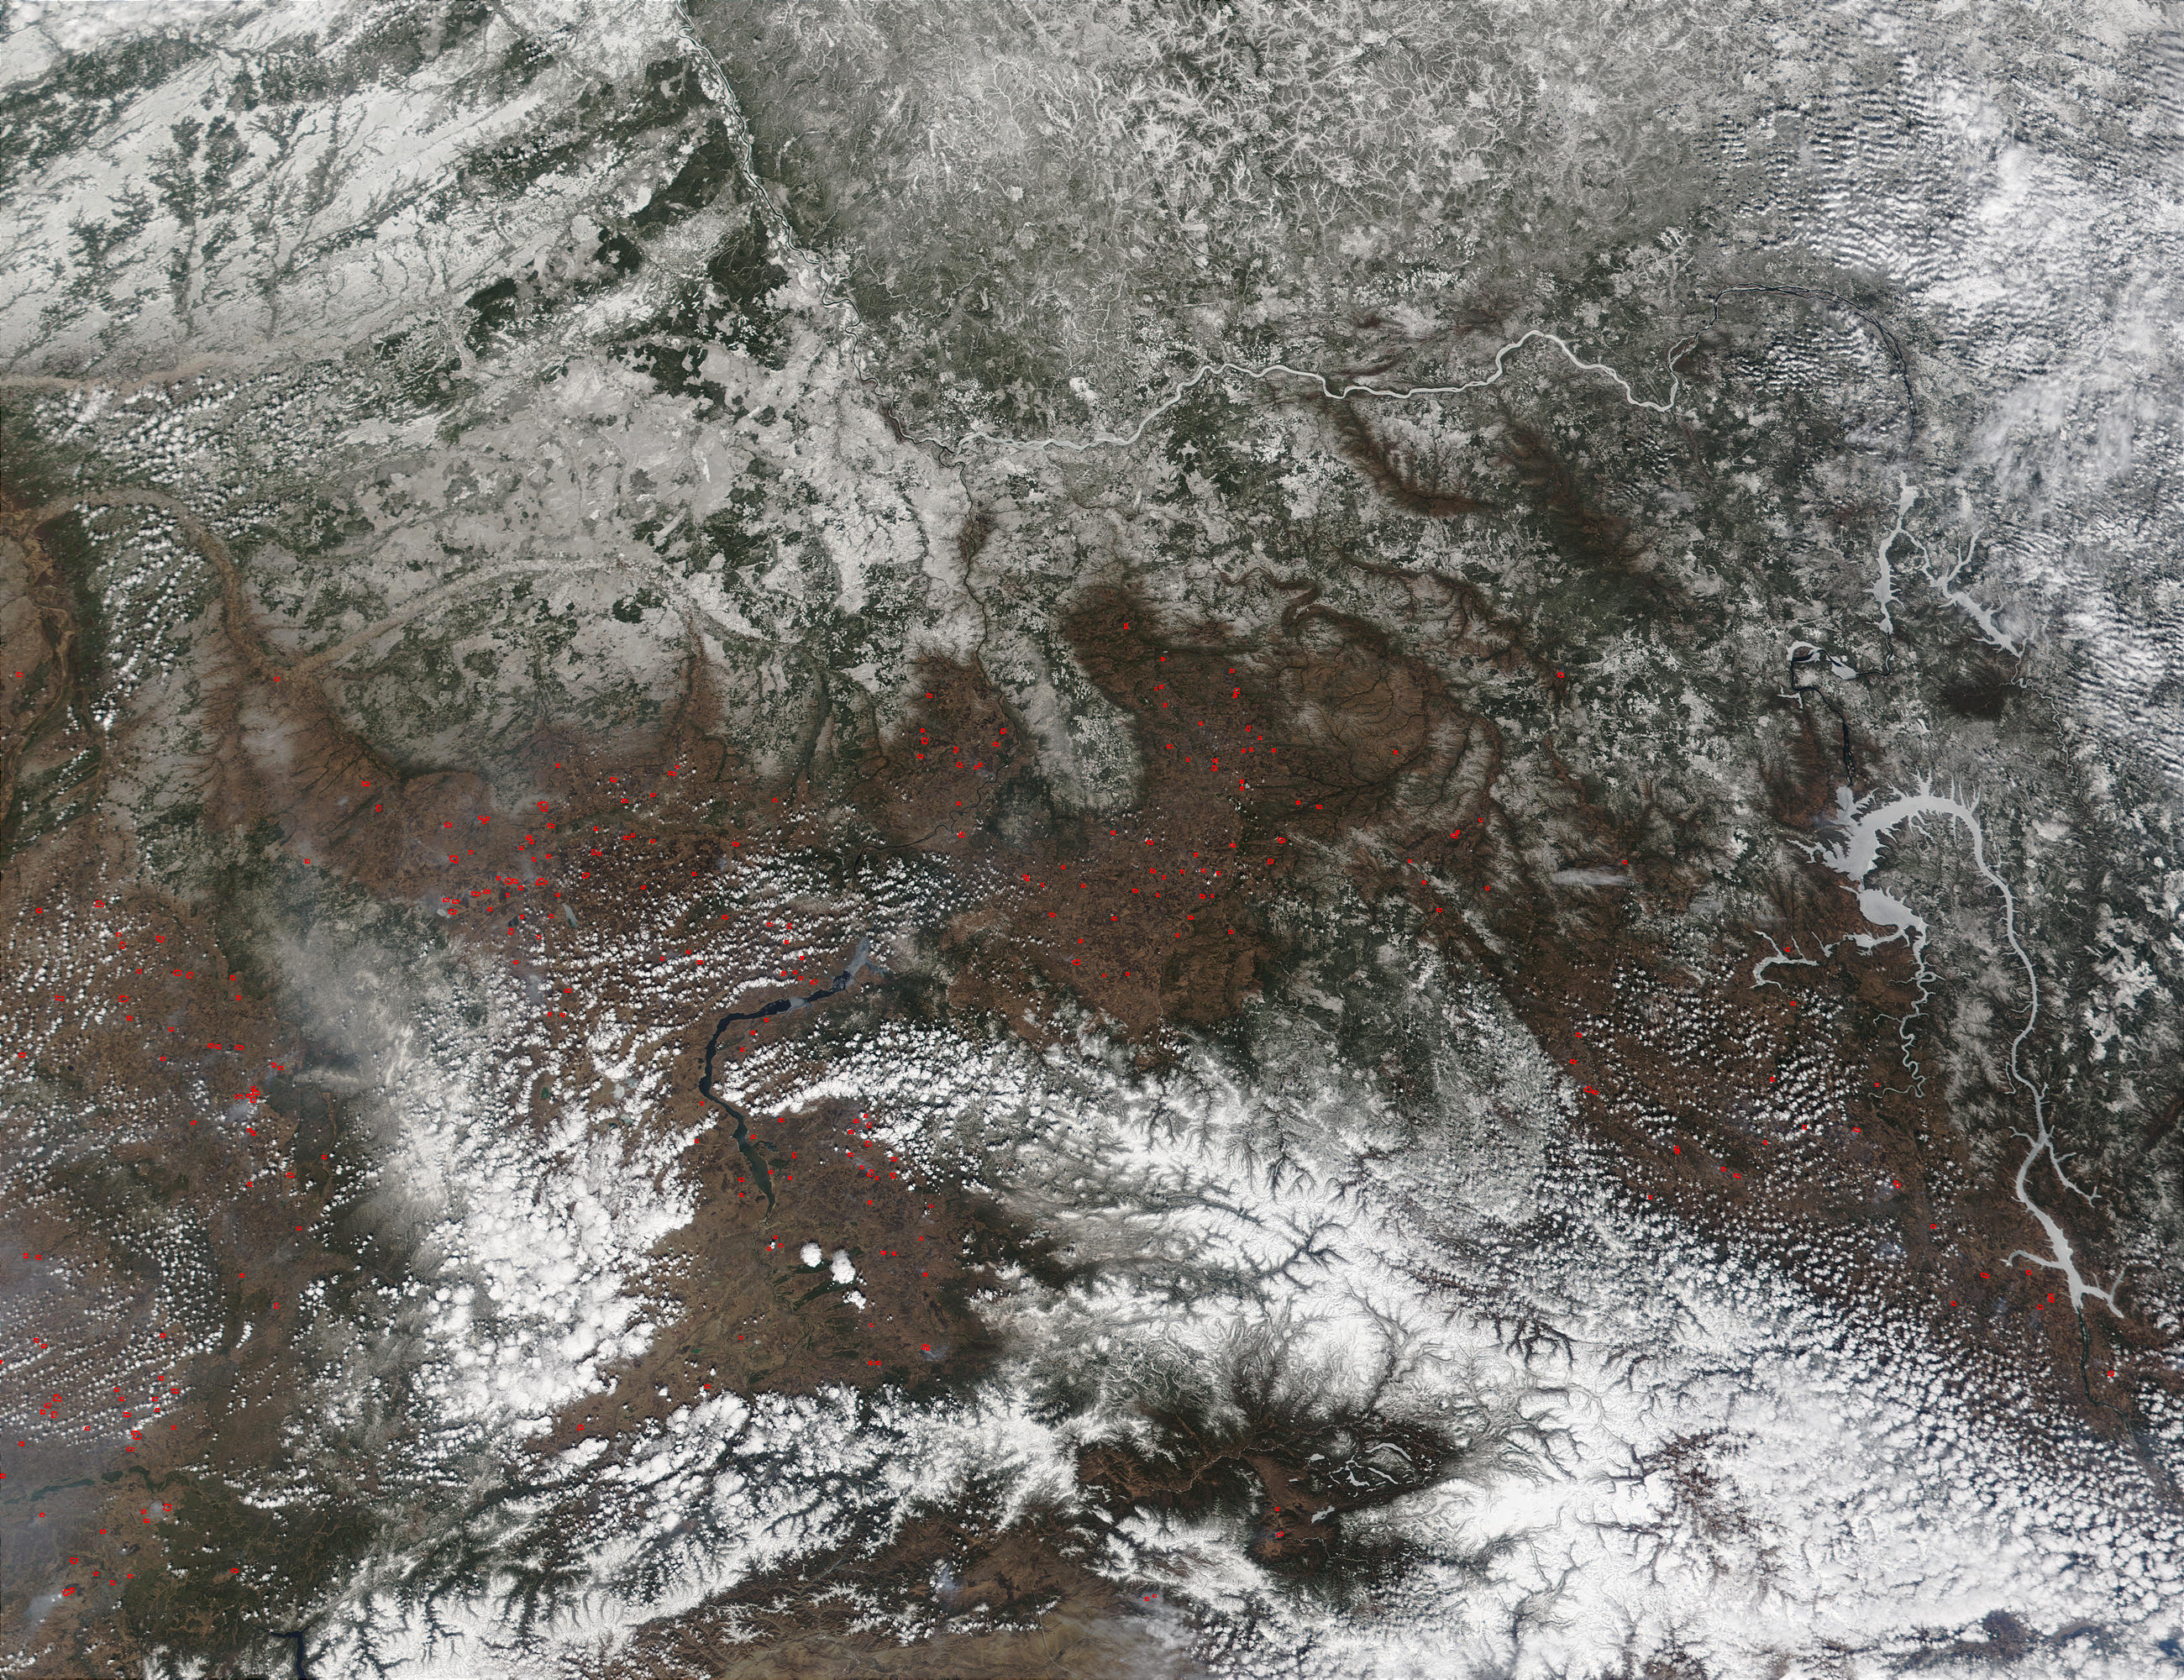 Scores of Wildfires in Russia's Krasnoyarsk Region - related image preview